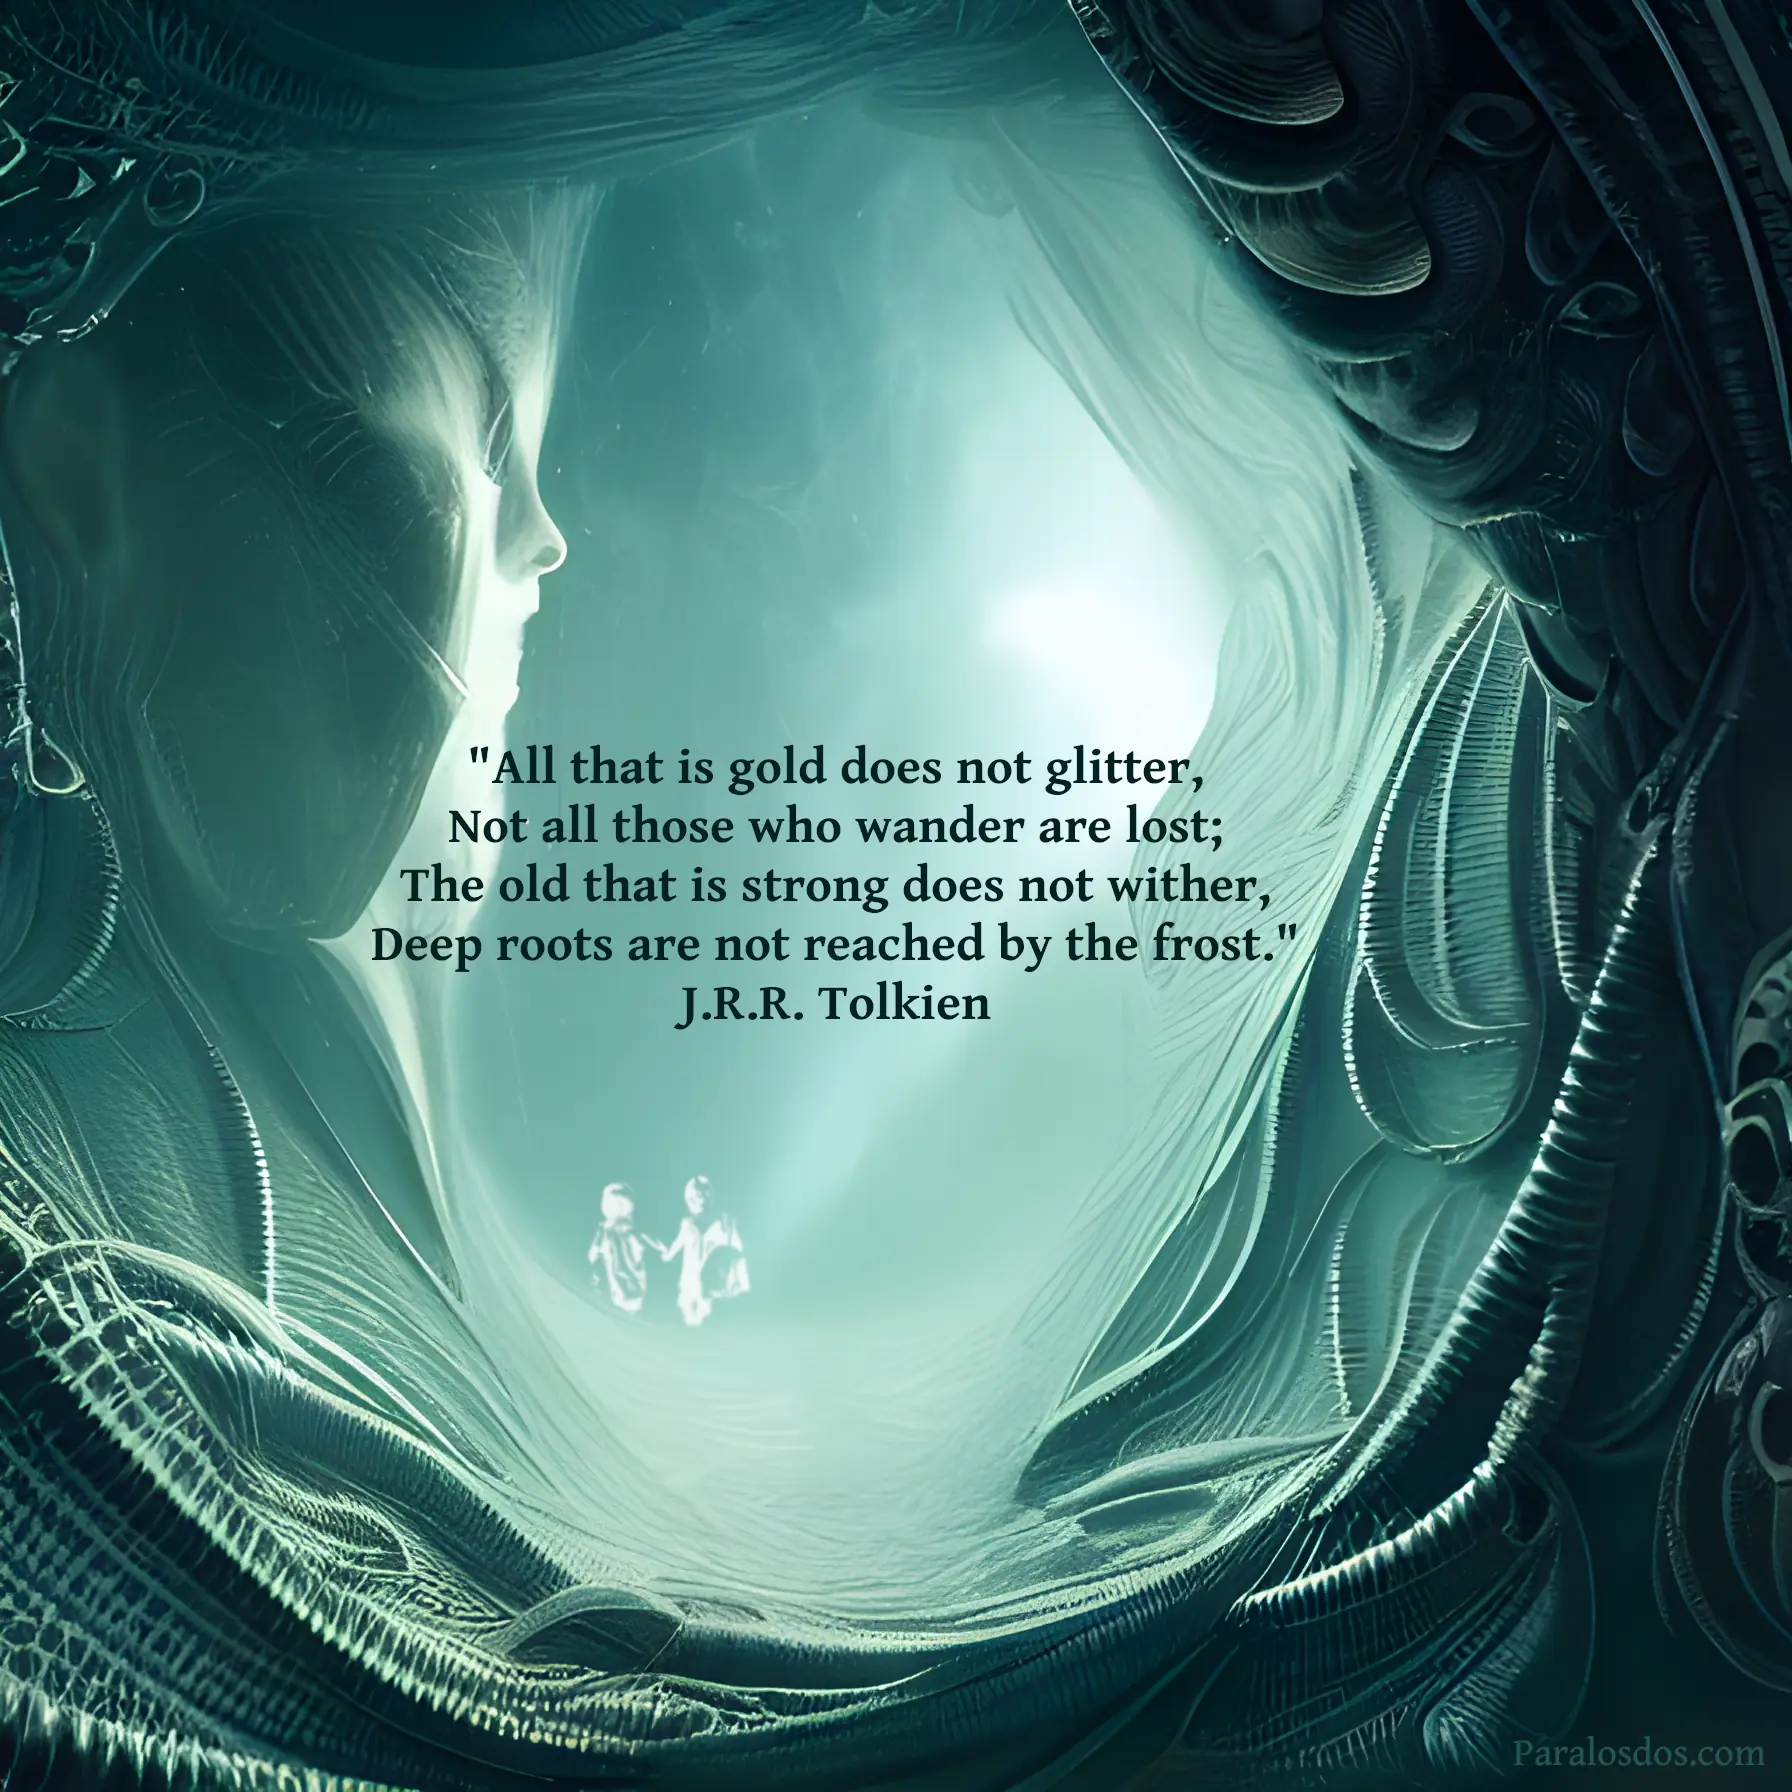 A fantastical artistic rendering of an alien-like ethereal cave. The quote reads: "All that is gold does not glitter, Not all those who wander are lost; The old that is strong does not wither, Deep roots are not reached by the frost." J.R.R. Tolkien